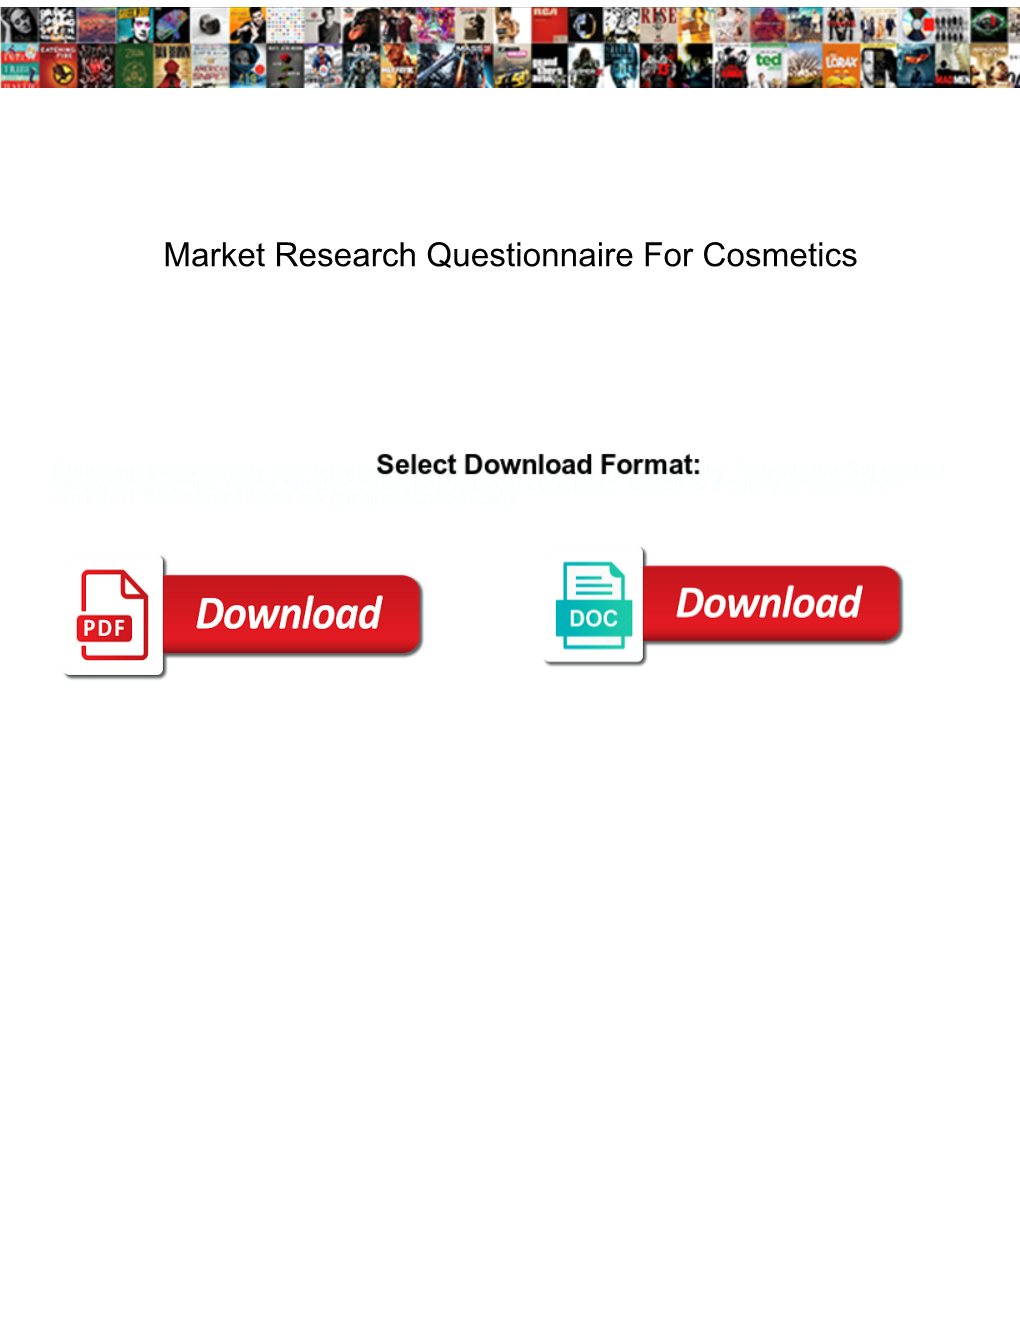 Market Research Questionnaire for Cosmetics